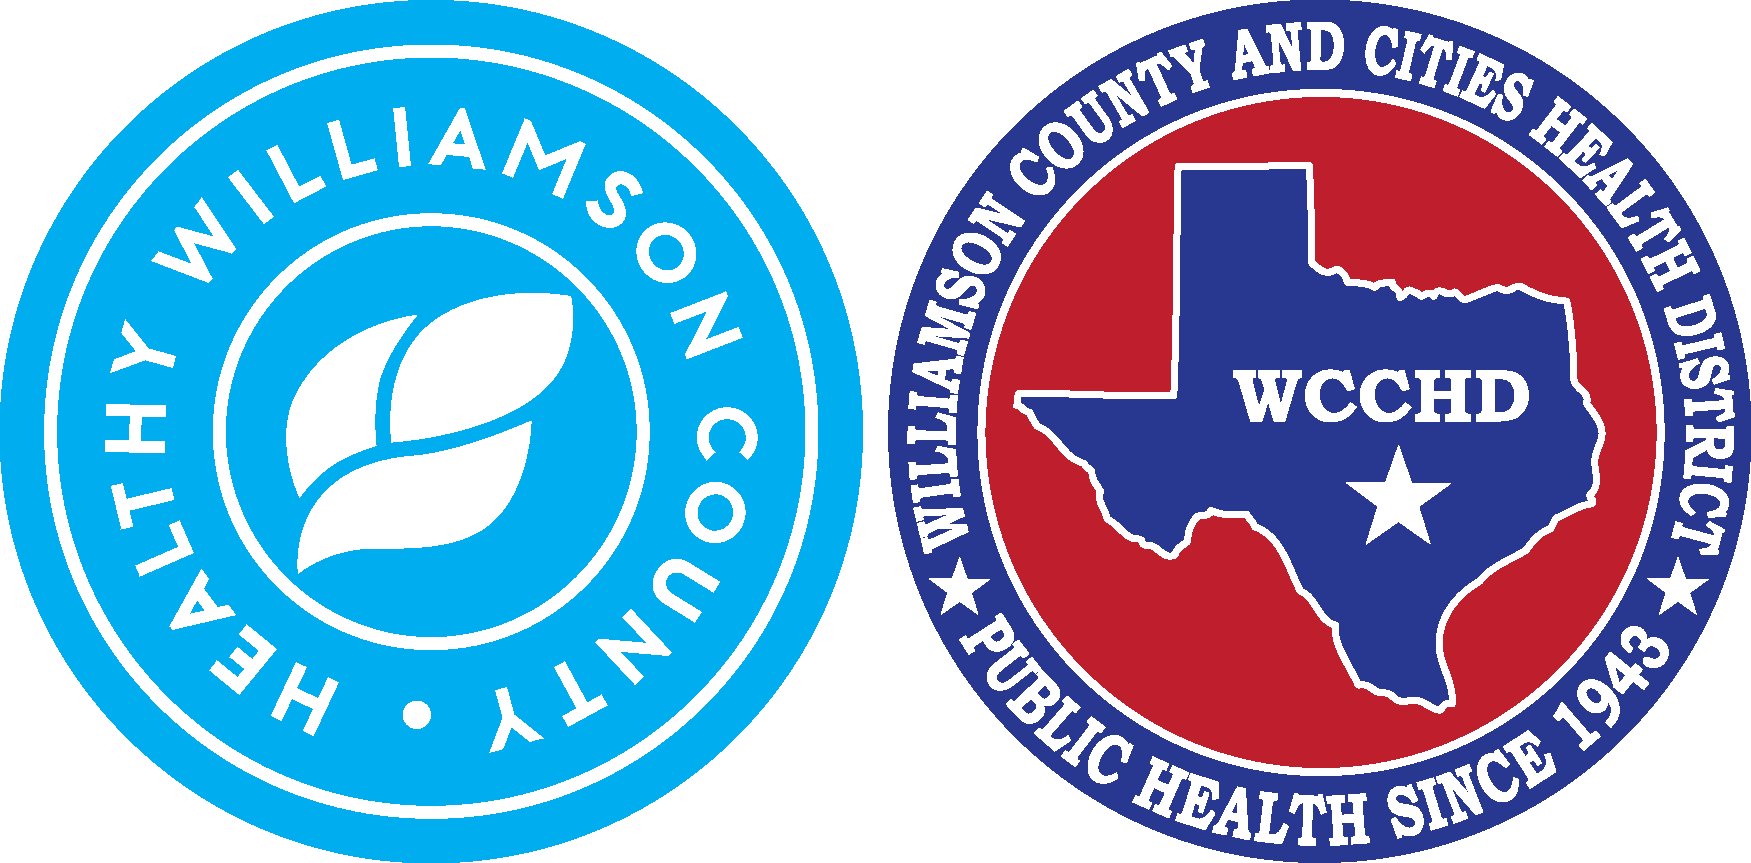 healthy williamson county logo and williamson county and cities health district logo